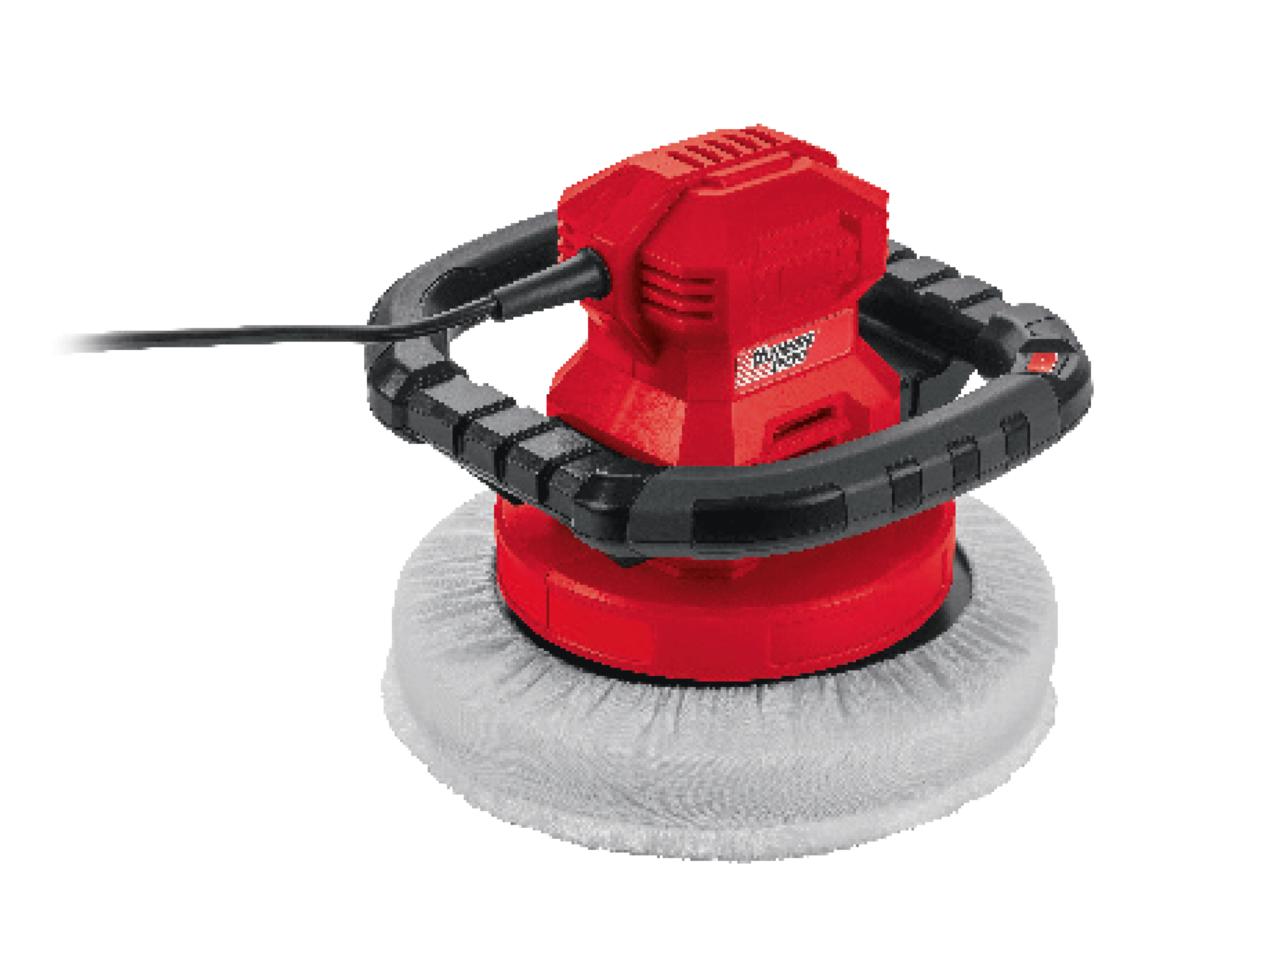 ULTIMATE SPEED 120W Electric Polisher